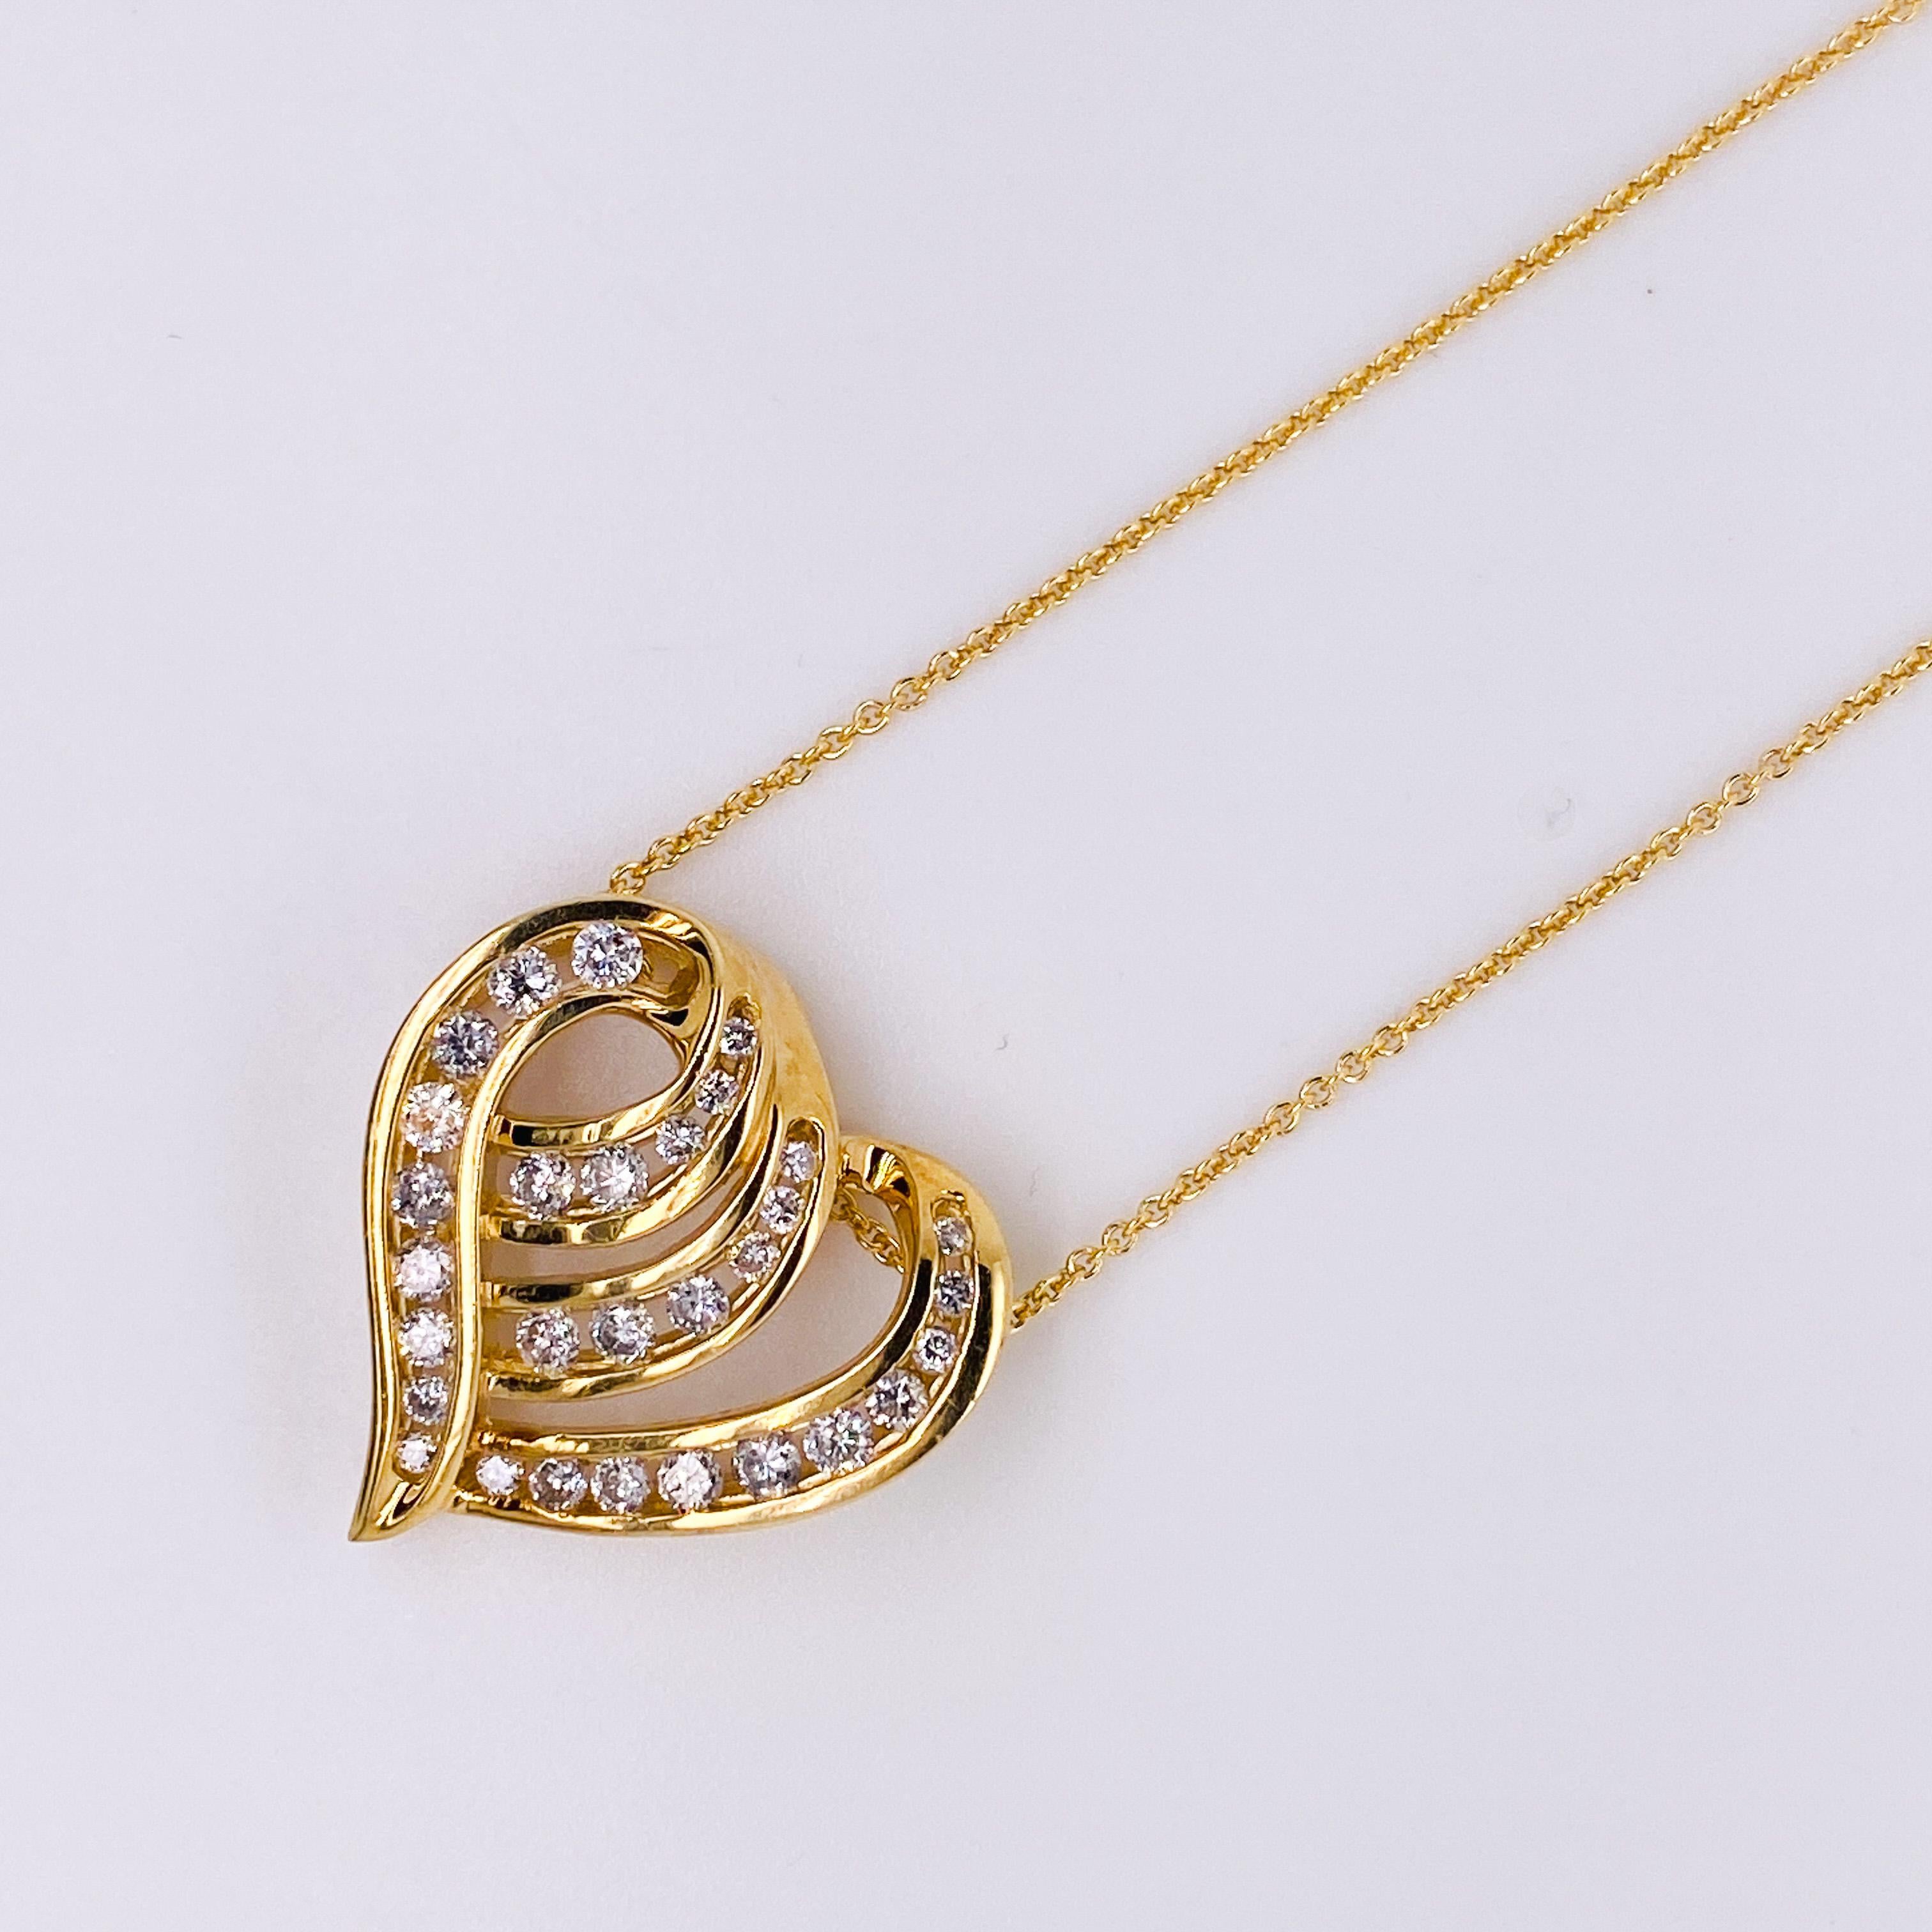 Let your love light shine through the open design of this heart pendant. The curling lines of the pendant are like the waves of your love. The diamonds along the open channels sparkle like the sun on the ocean of your love. The natural round